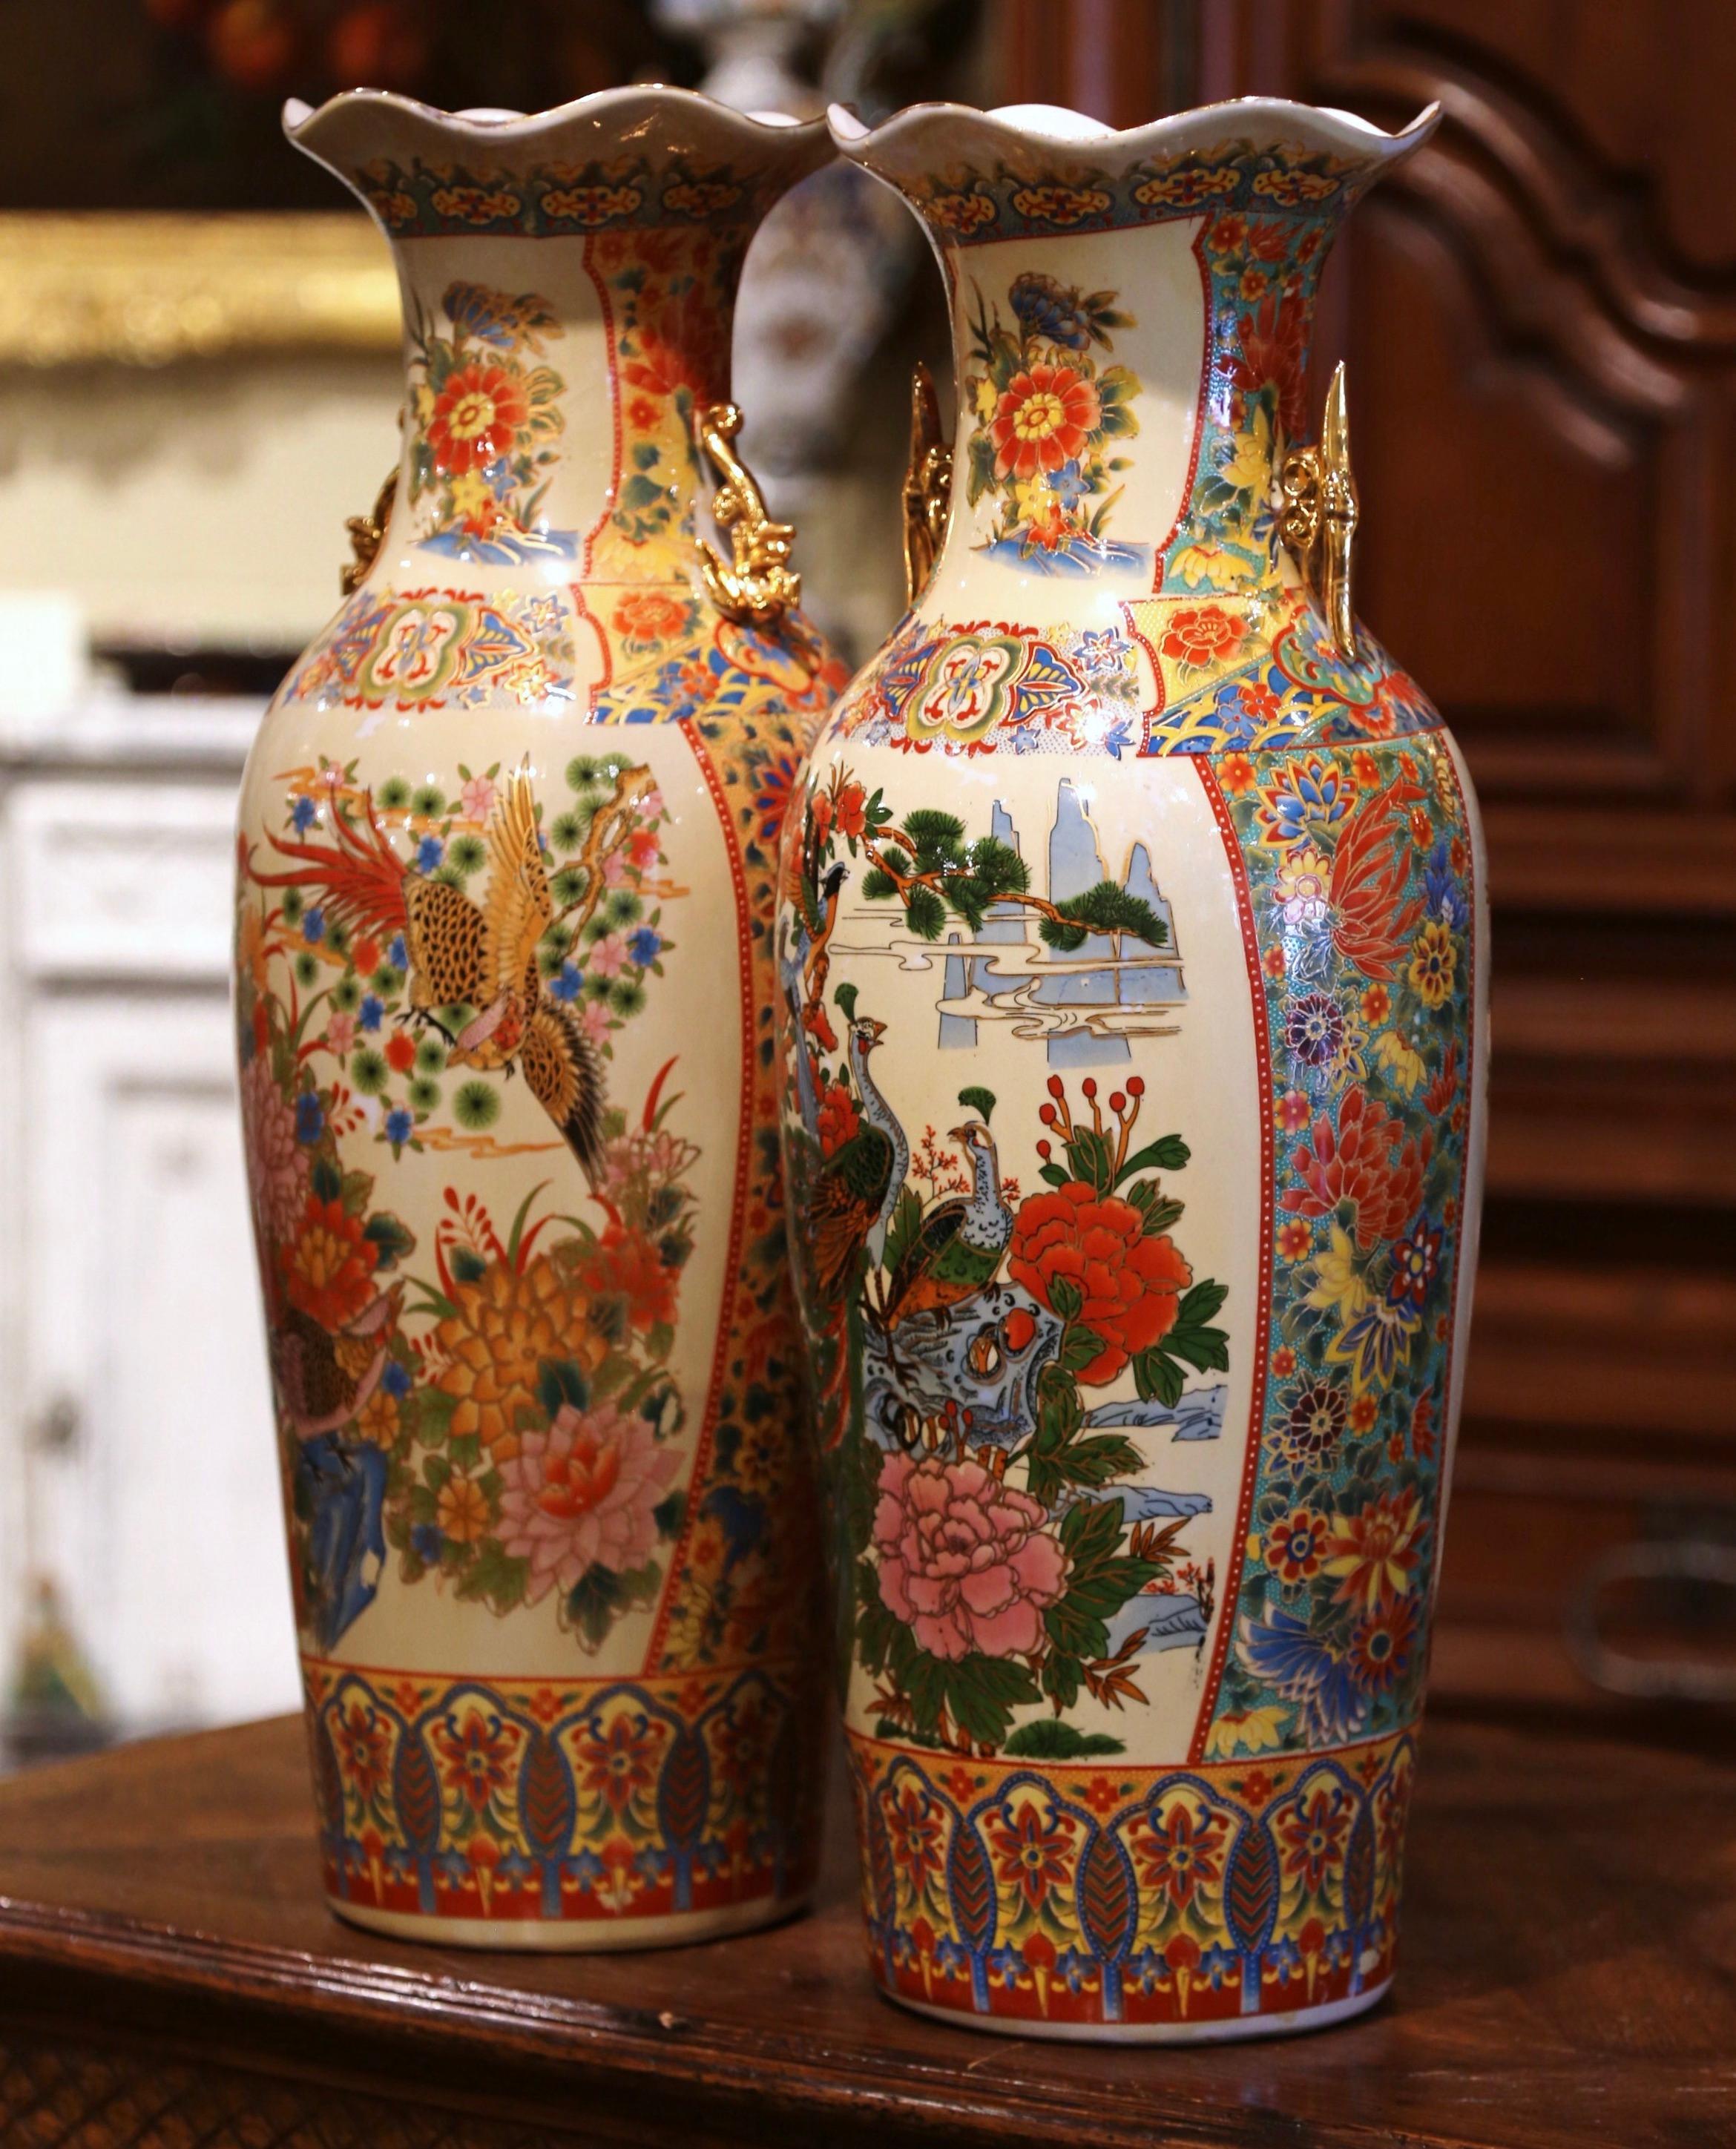 These elegant colorful vintage vases were created in China circa 1970; made of porcelain and embellished with gilt ruyi scepter handles, each tall vase with scalloped rim, is decorated with hand painted polychrome enameled flowers, and alternating